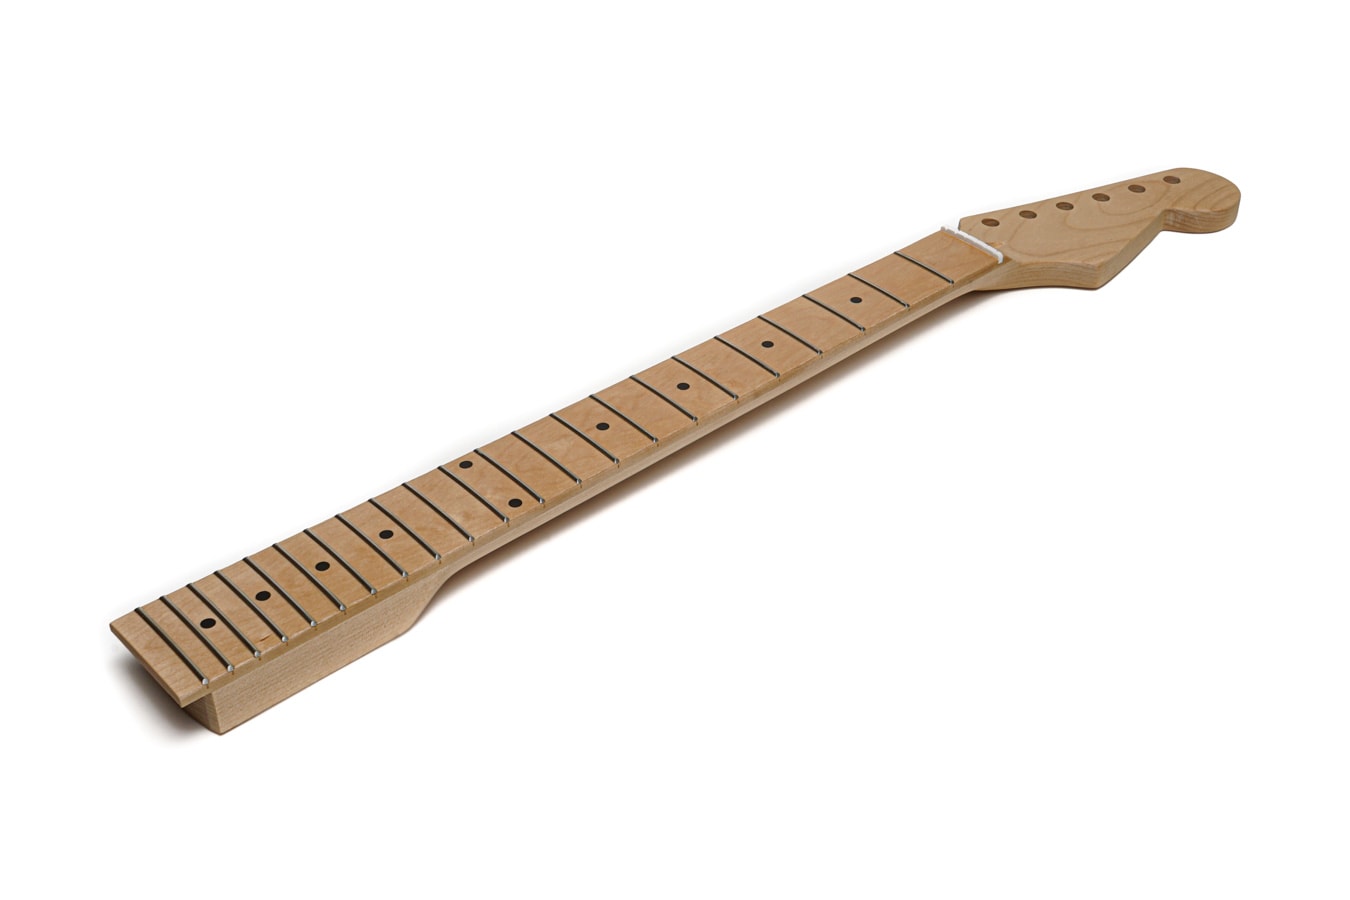 BexGears Guitar Neck for FV style Canada Maple 22 Fret Bolt On composite ebony fingerboar